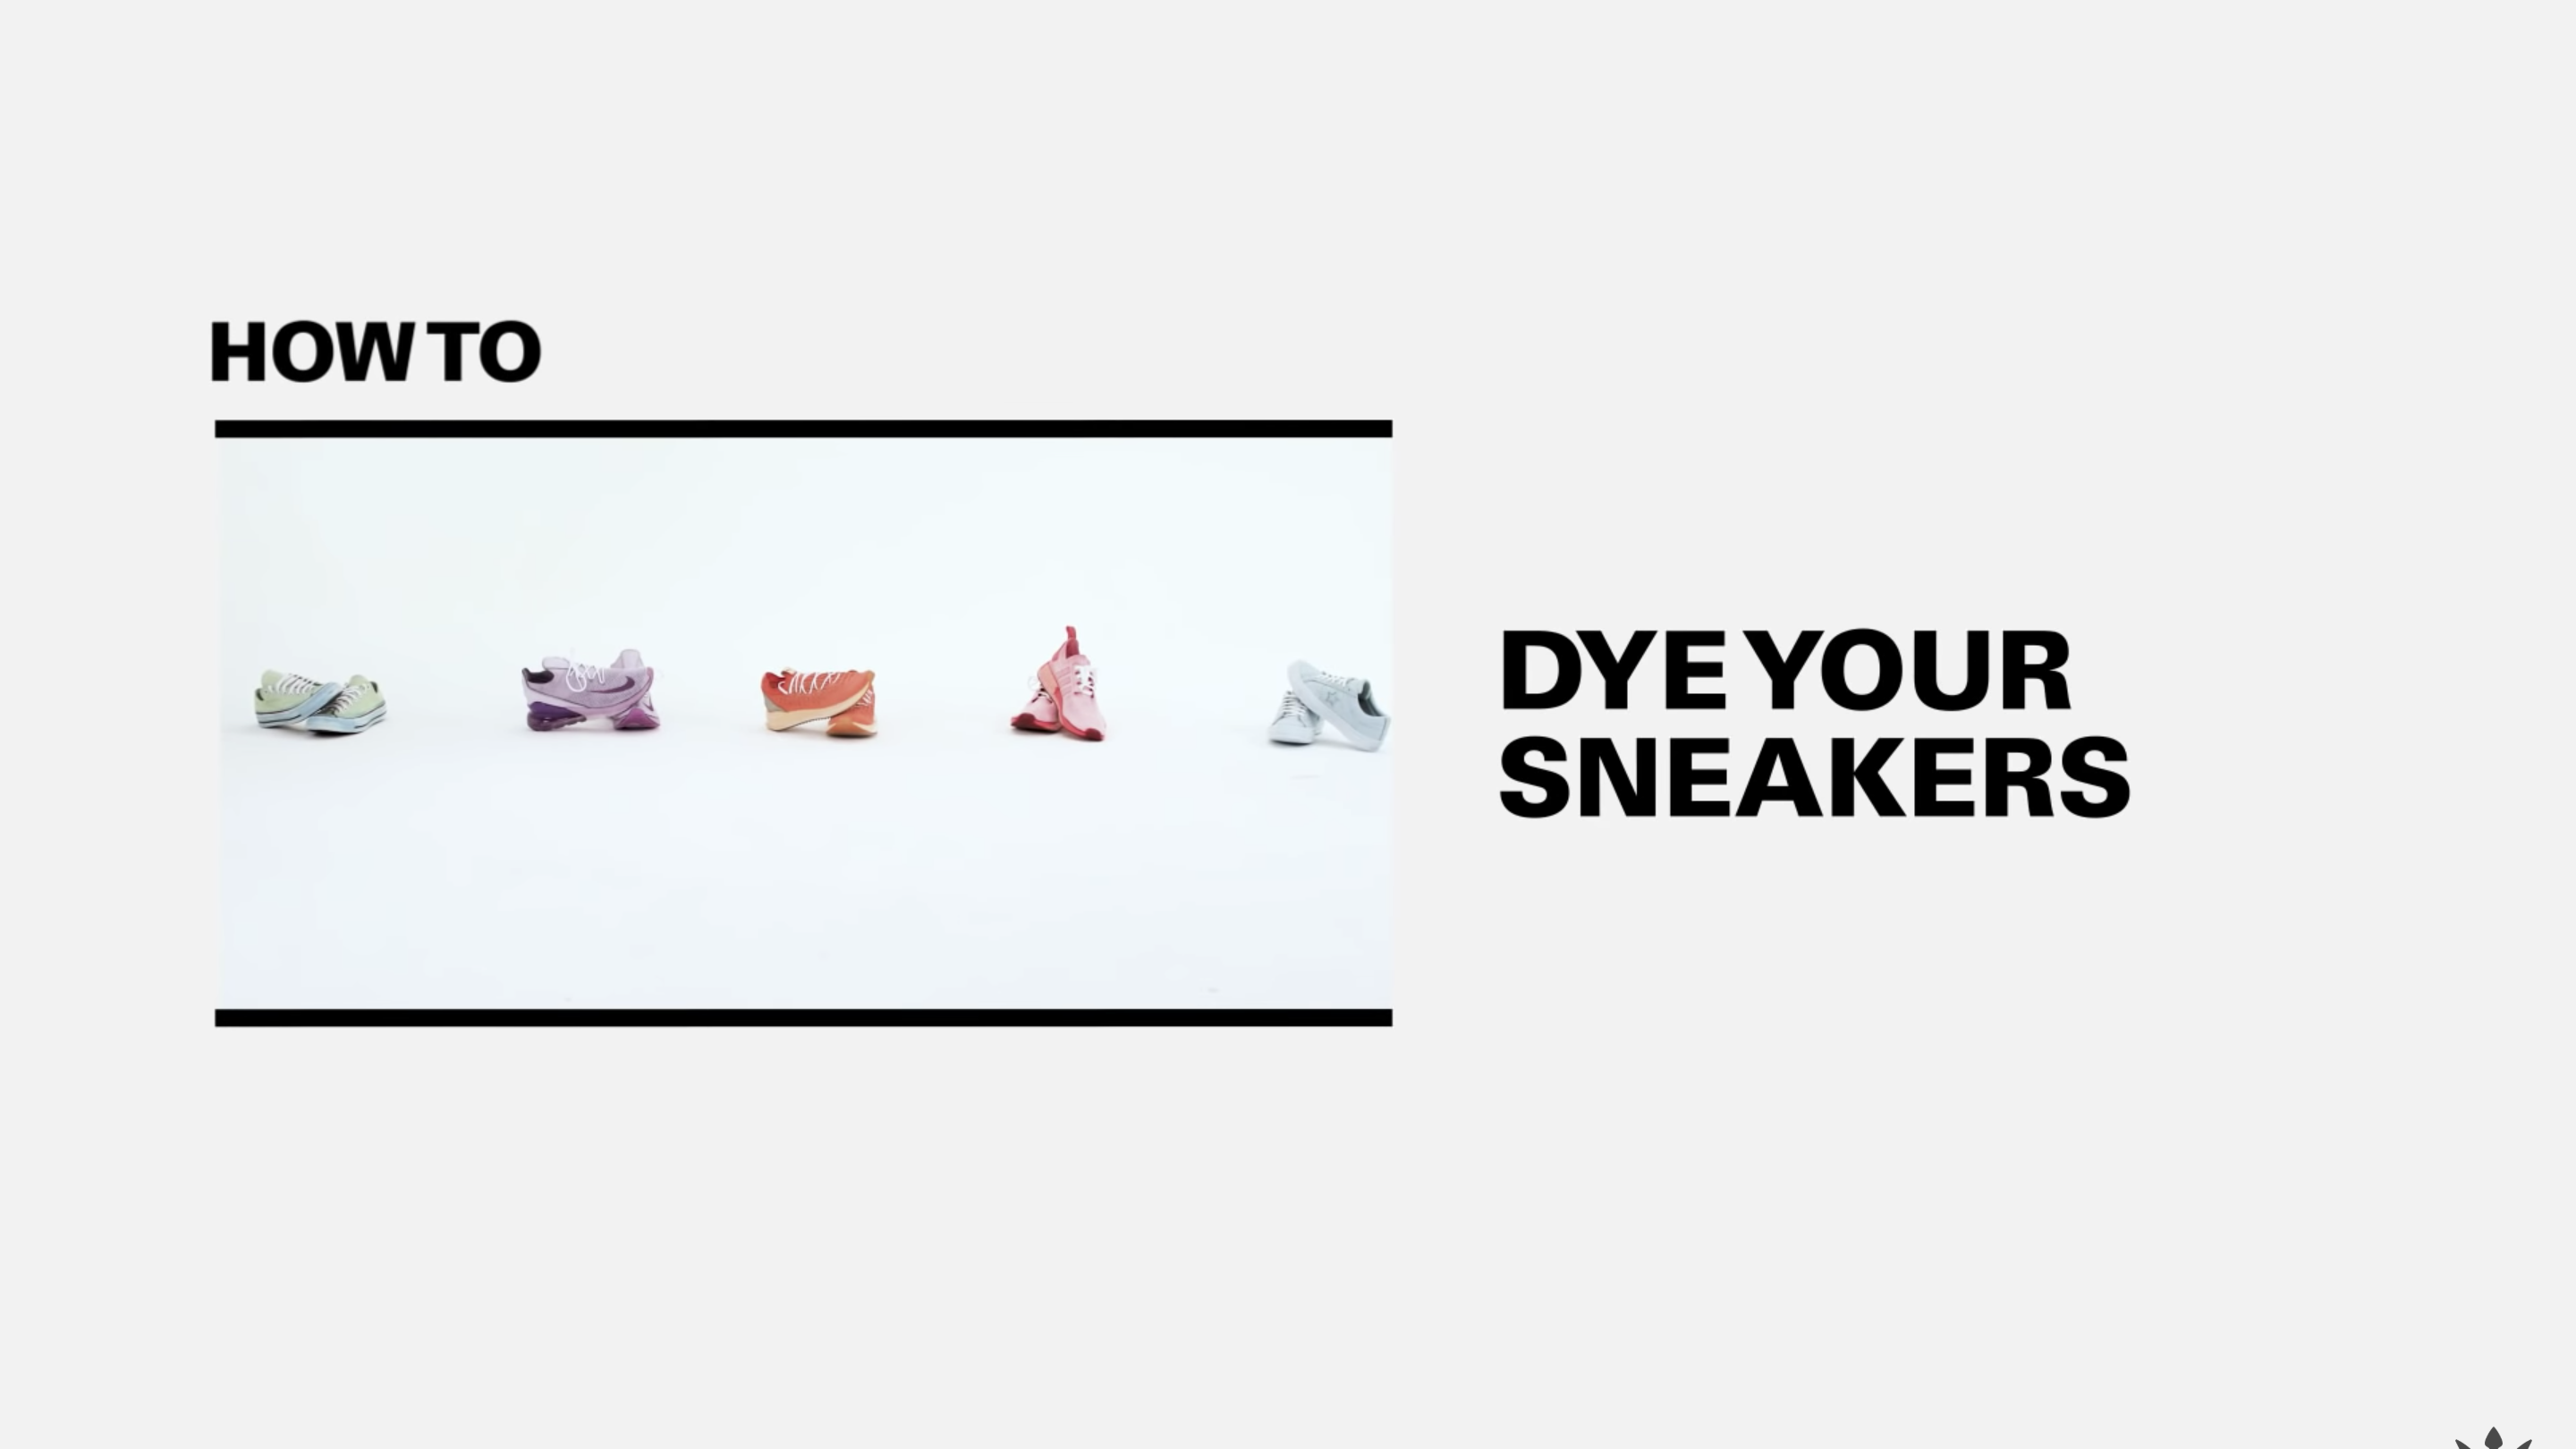 Category DIY - Guide to dyeing shoes with simple steps